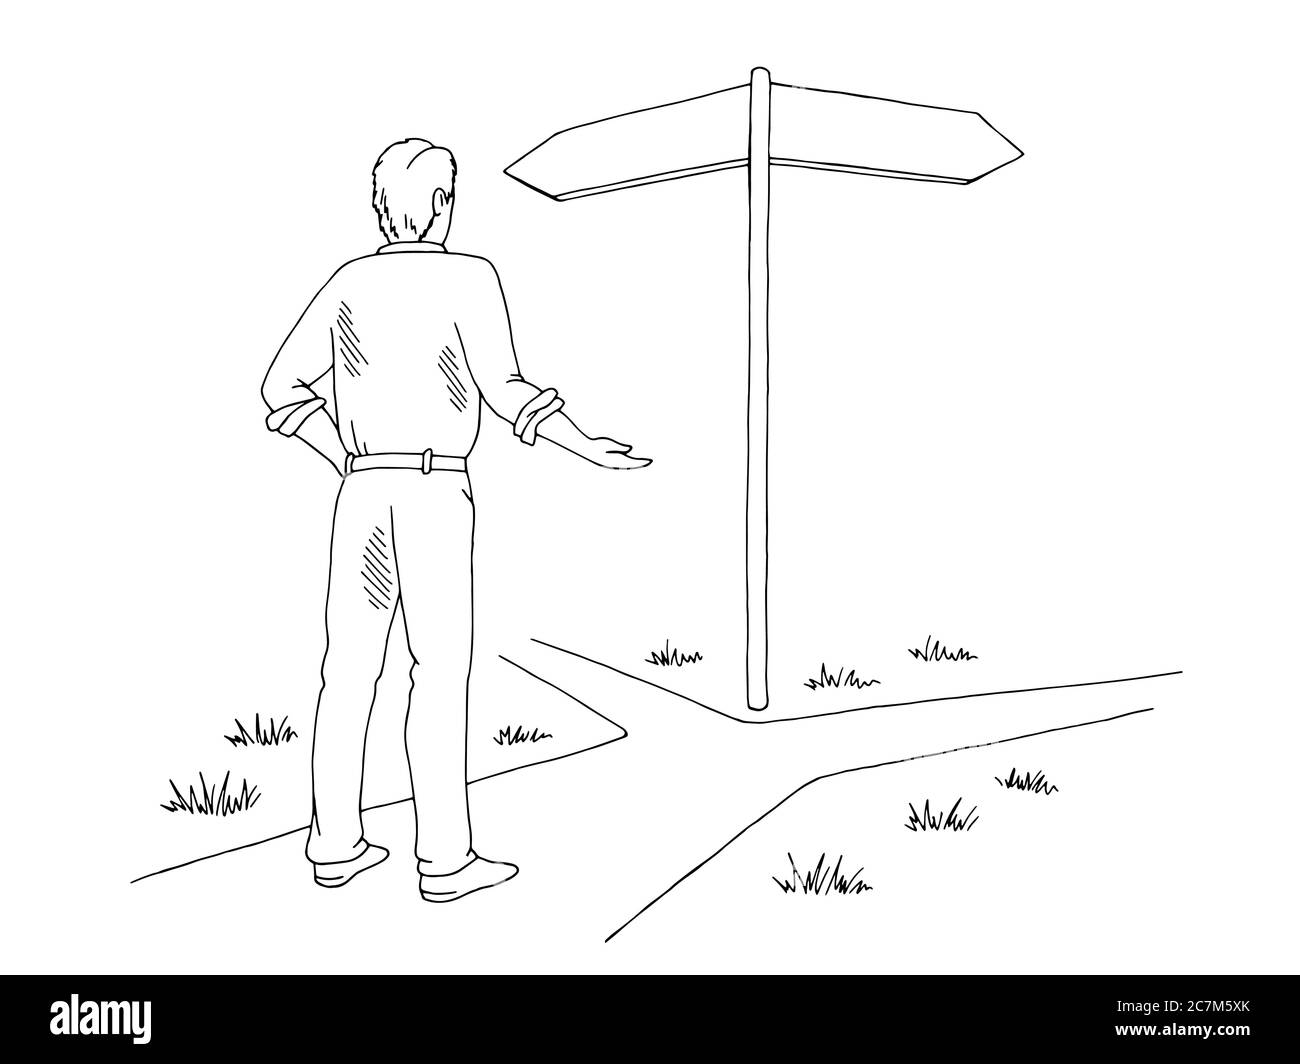 Man makes a choice, standing at a crossroads graphic black white sketch illustration vector Stock Vector